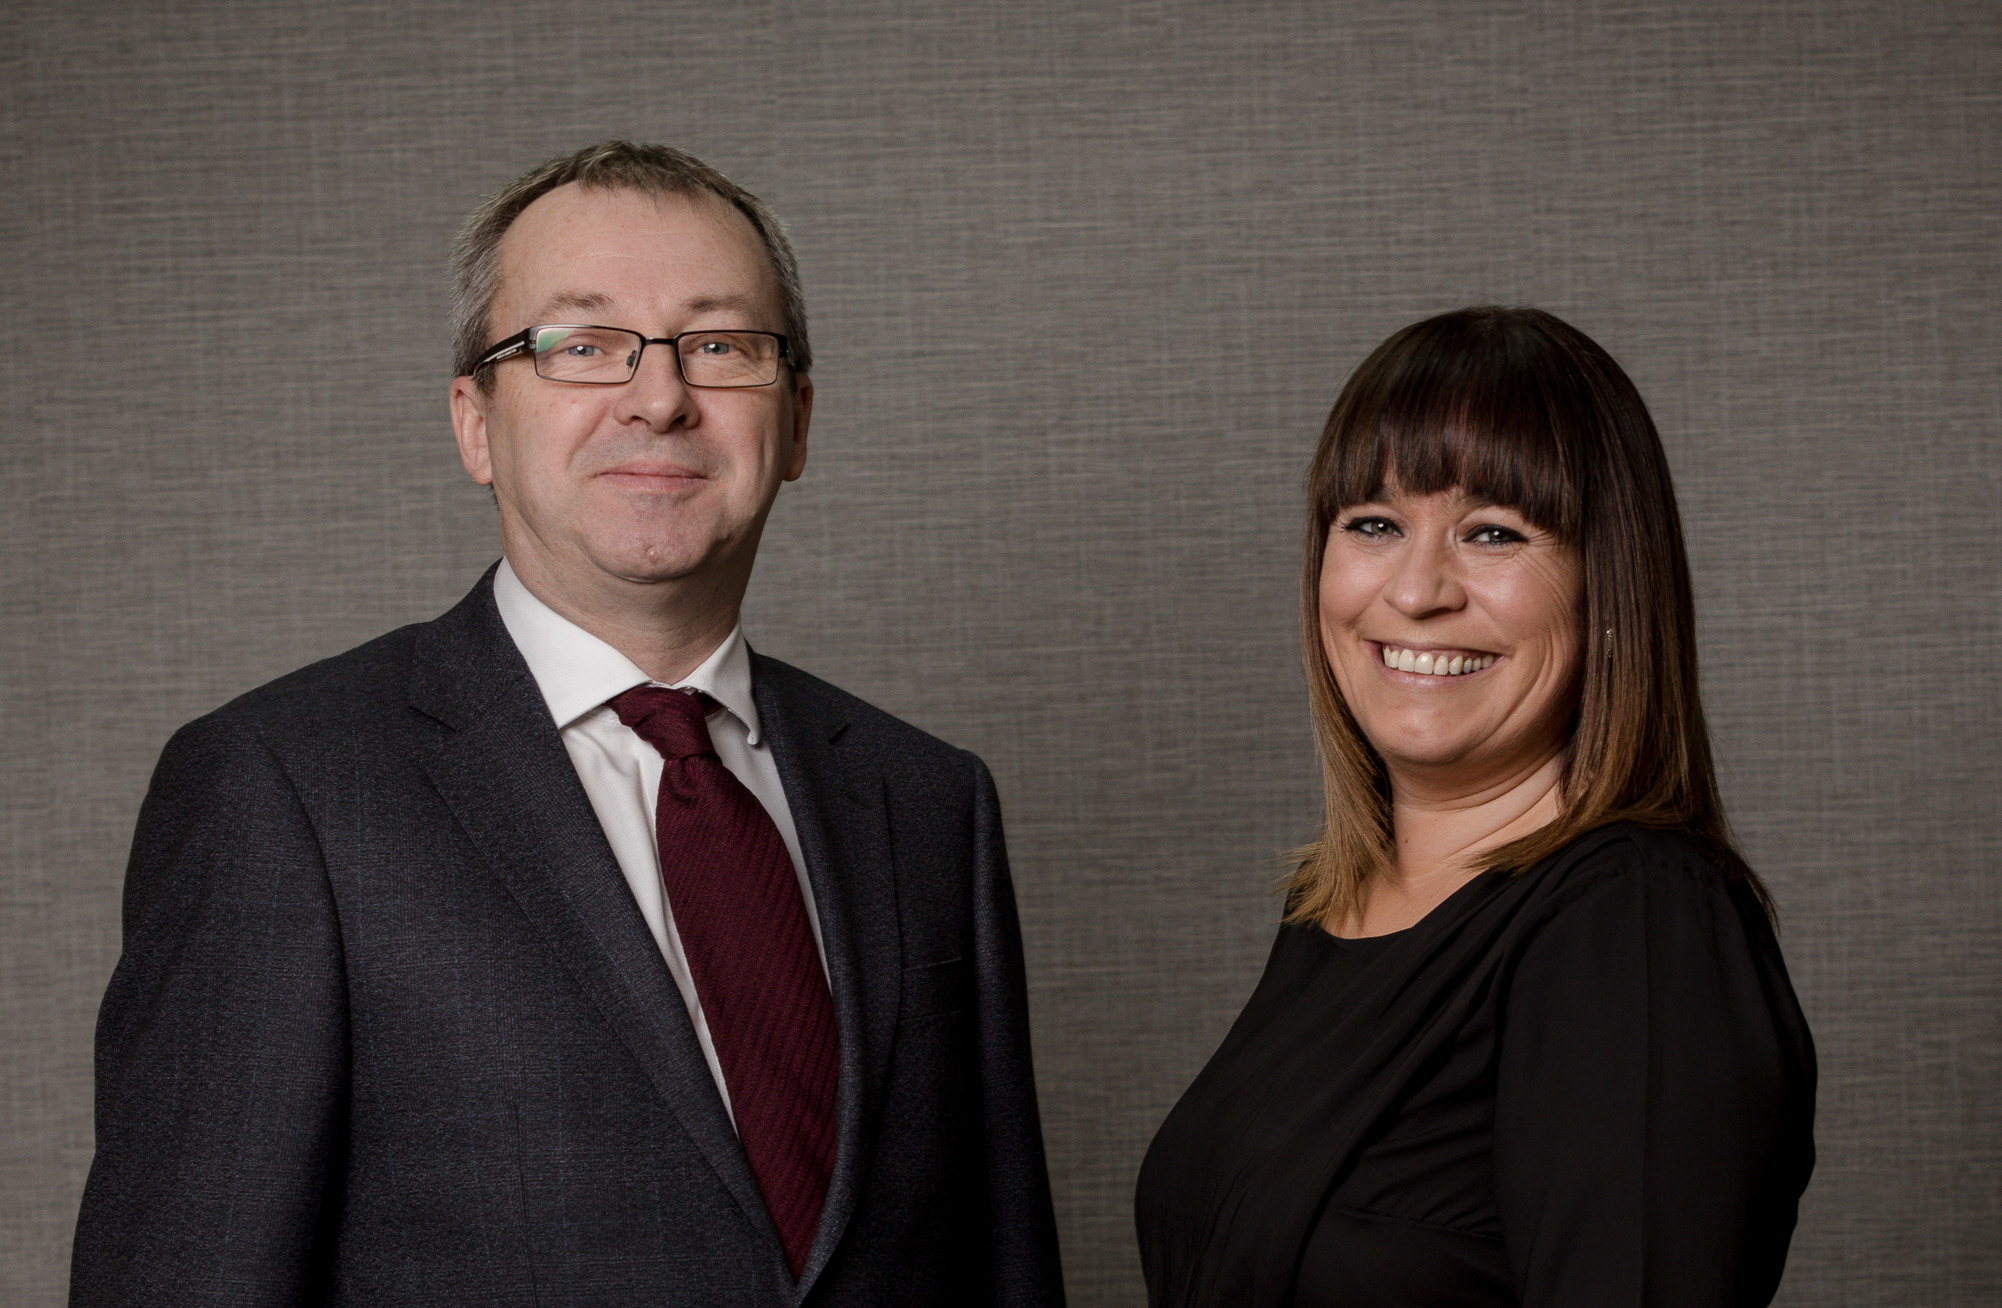 Boston Multi Family Office completes acquisition of Isle of Man fiduciary business